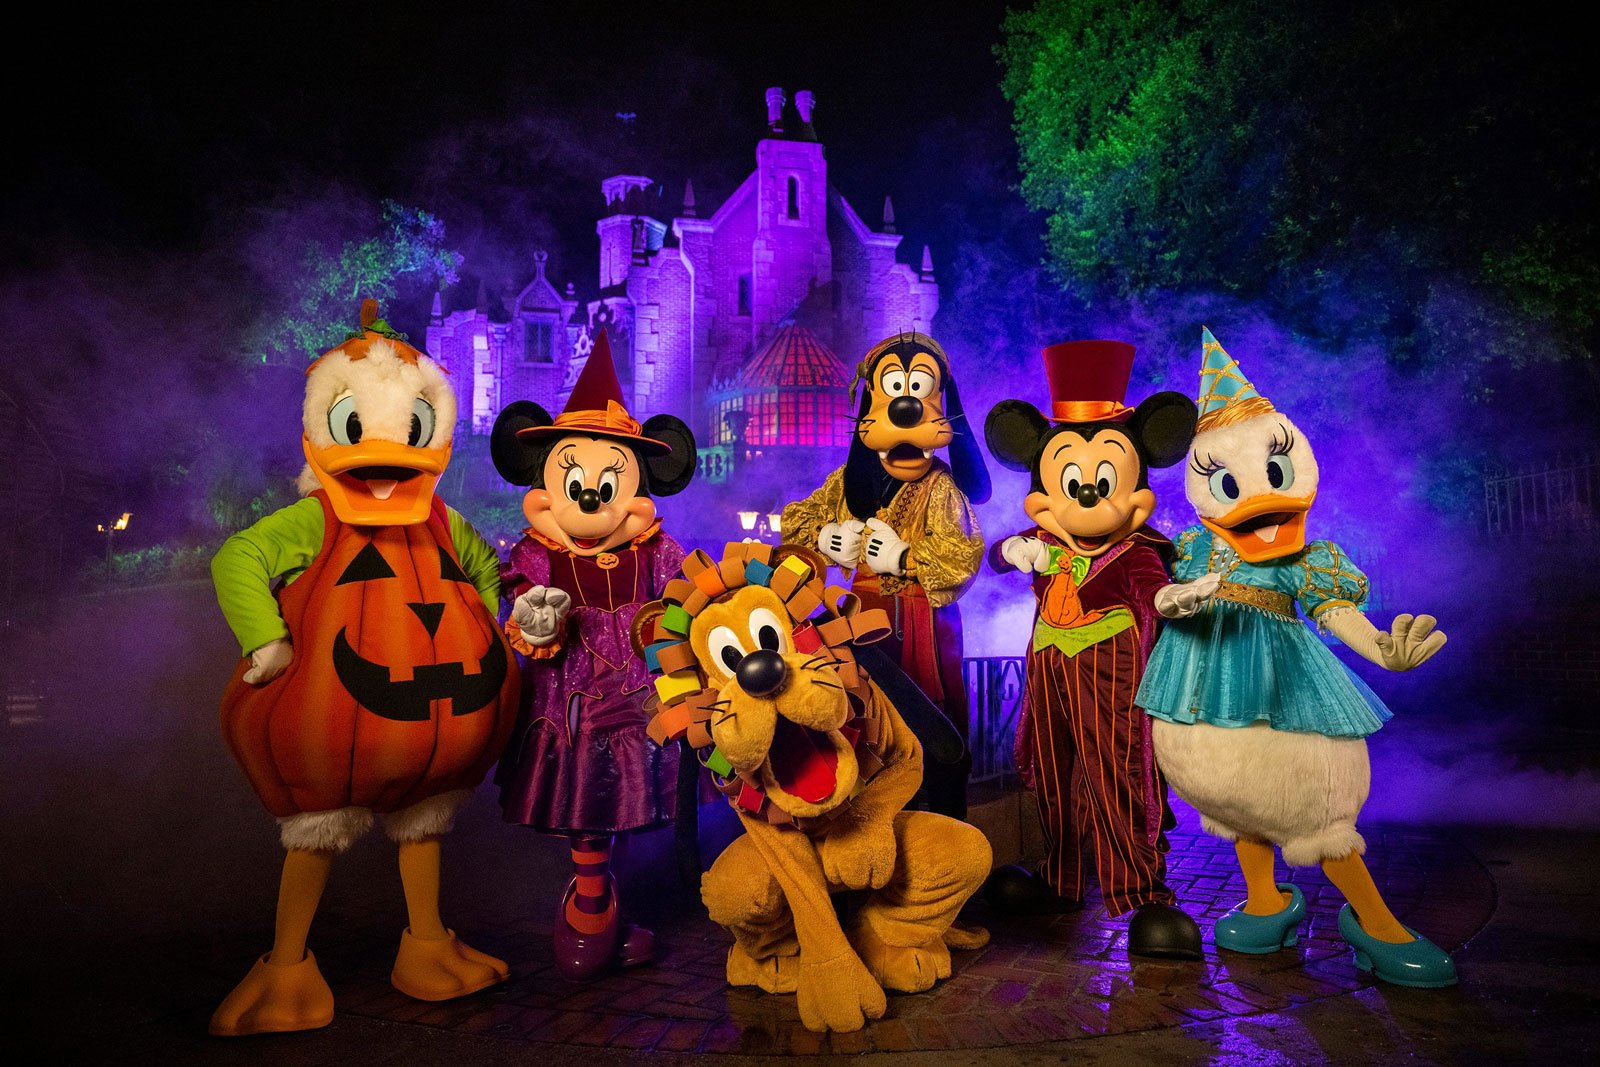 Costumed performaers dressed as Mickey and Minnie Mouse, Pluto, Goofy, and Donald and Daisy Duck in front of Cinderella's Castle at the Disney World Halloween event